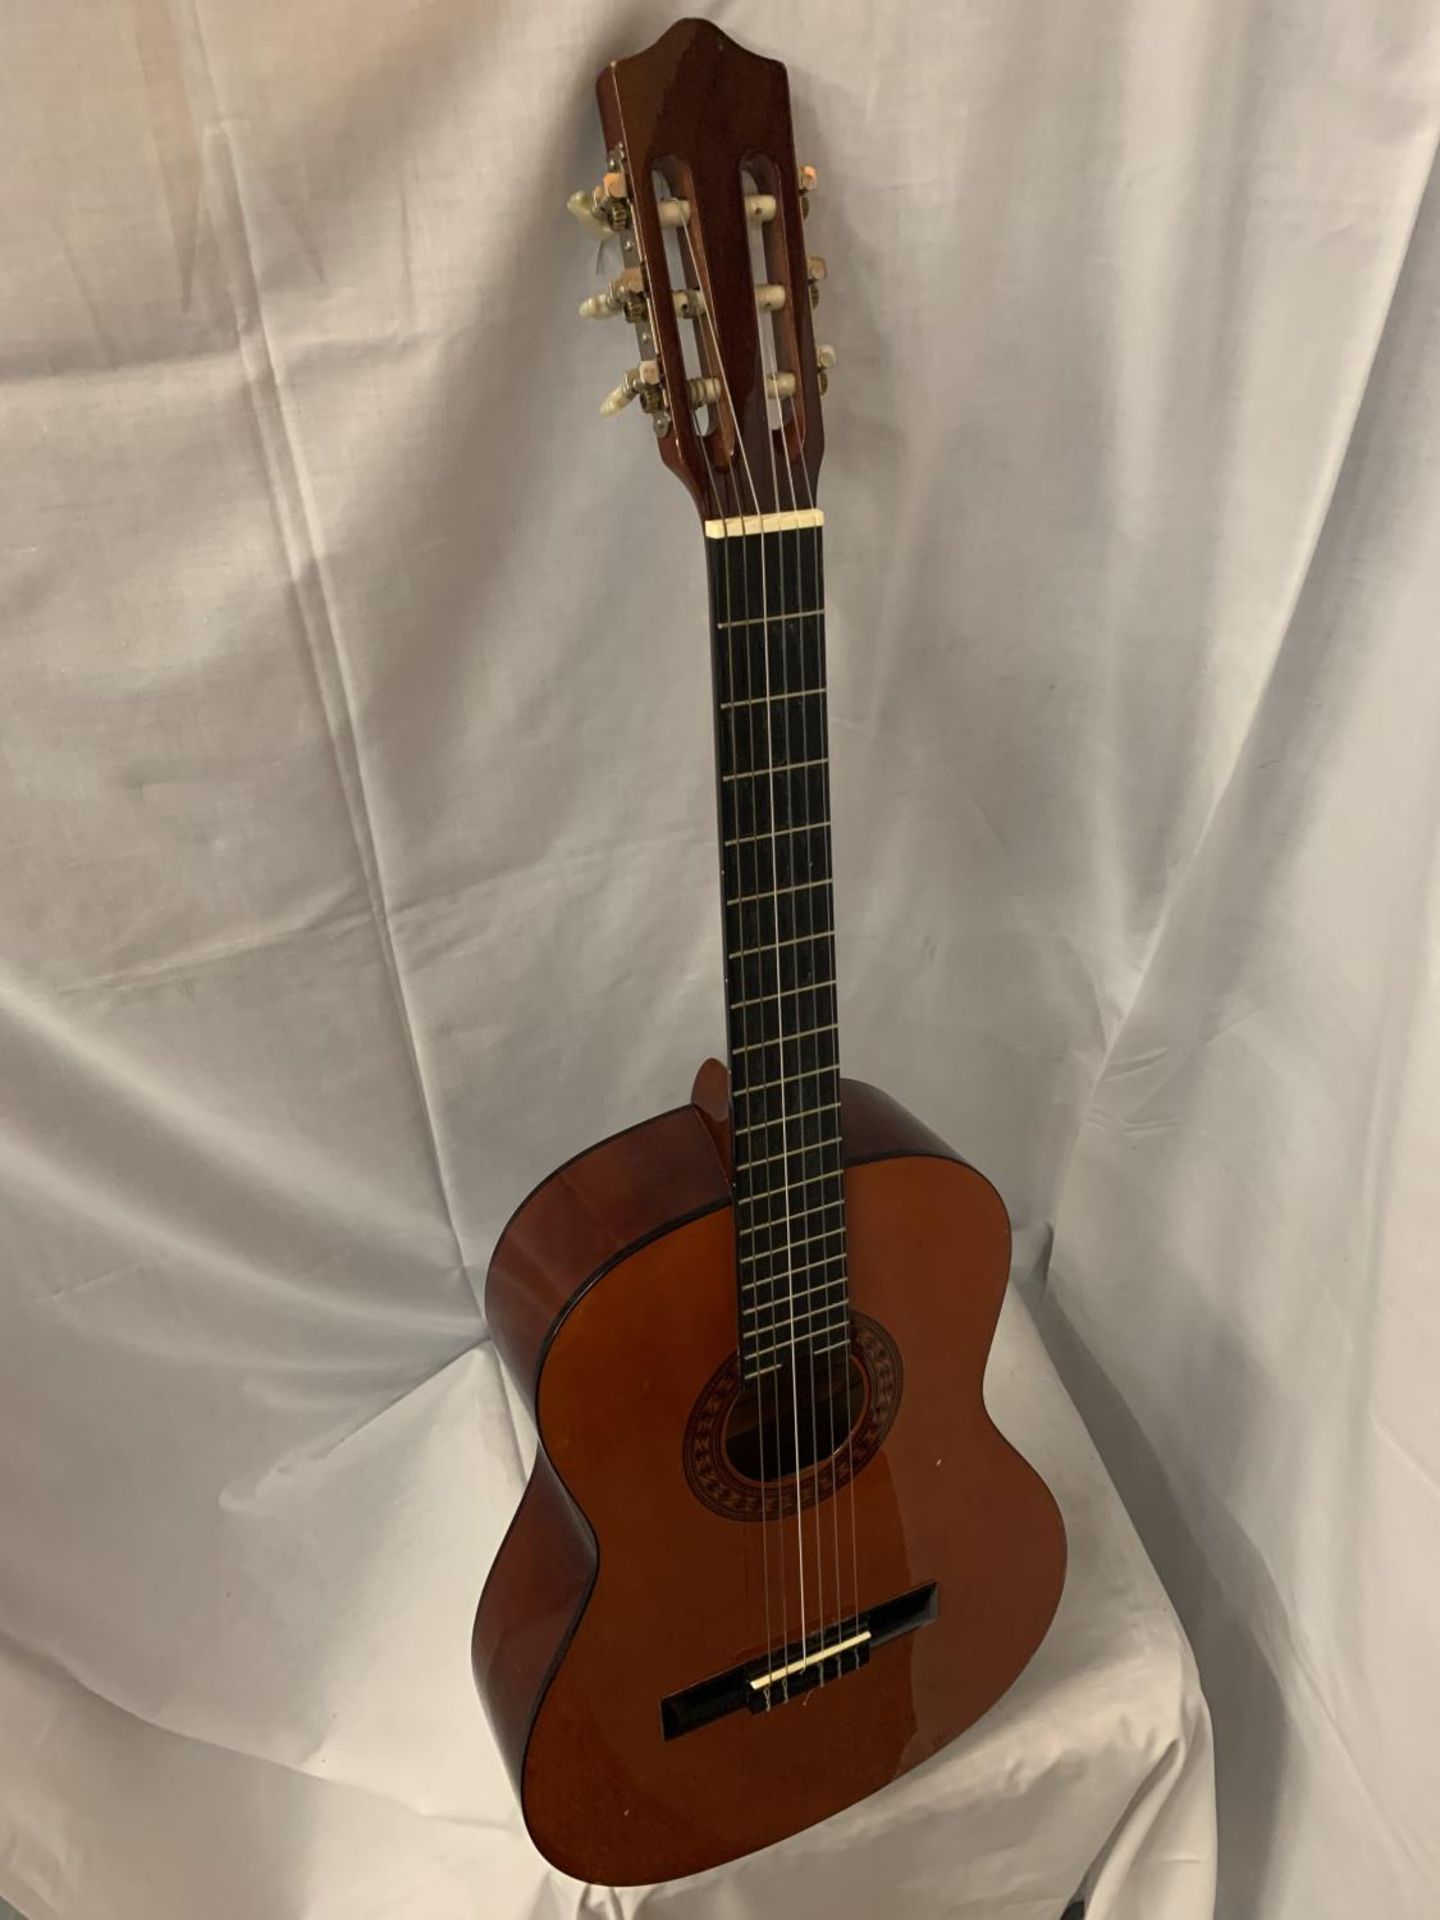 A STAGG ACOUSTIC GUITAR - Image 2 of 3